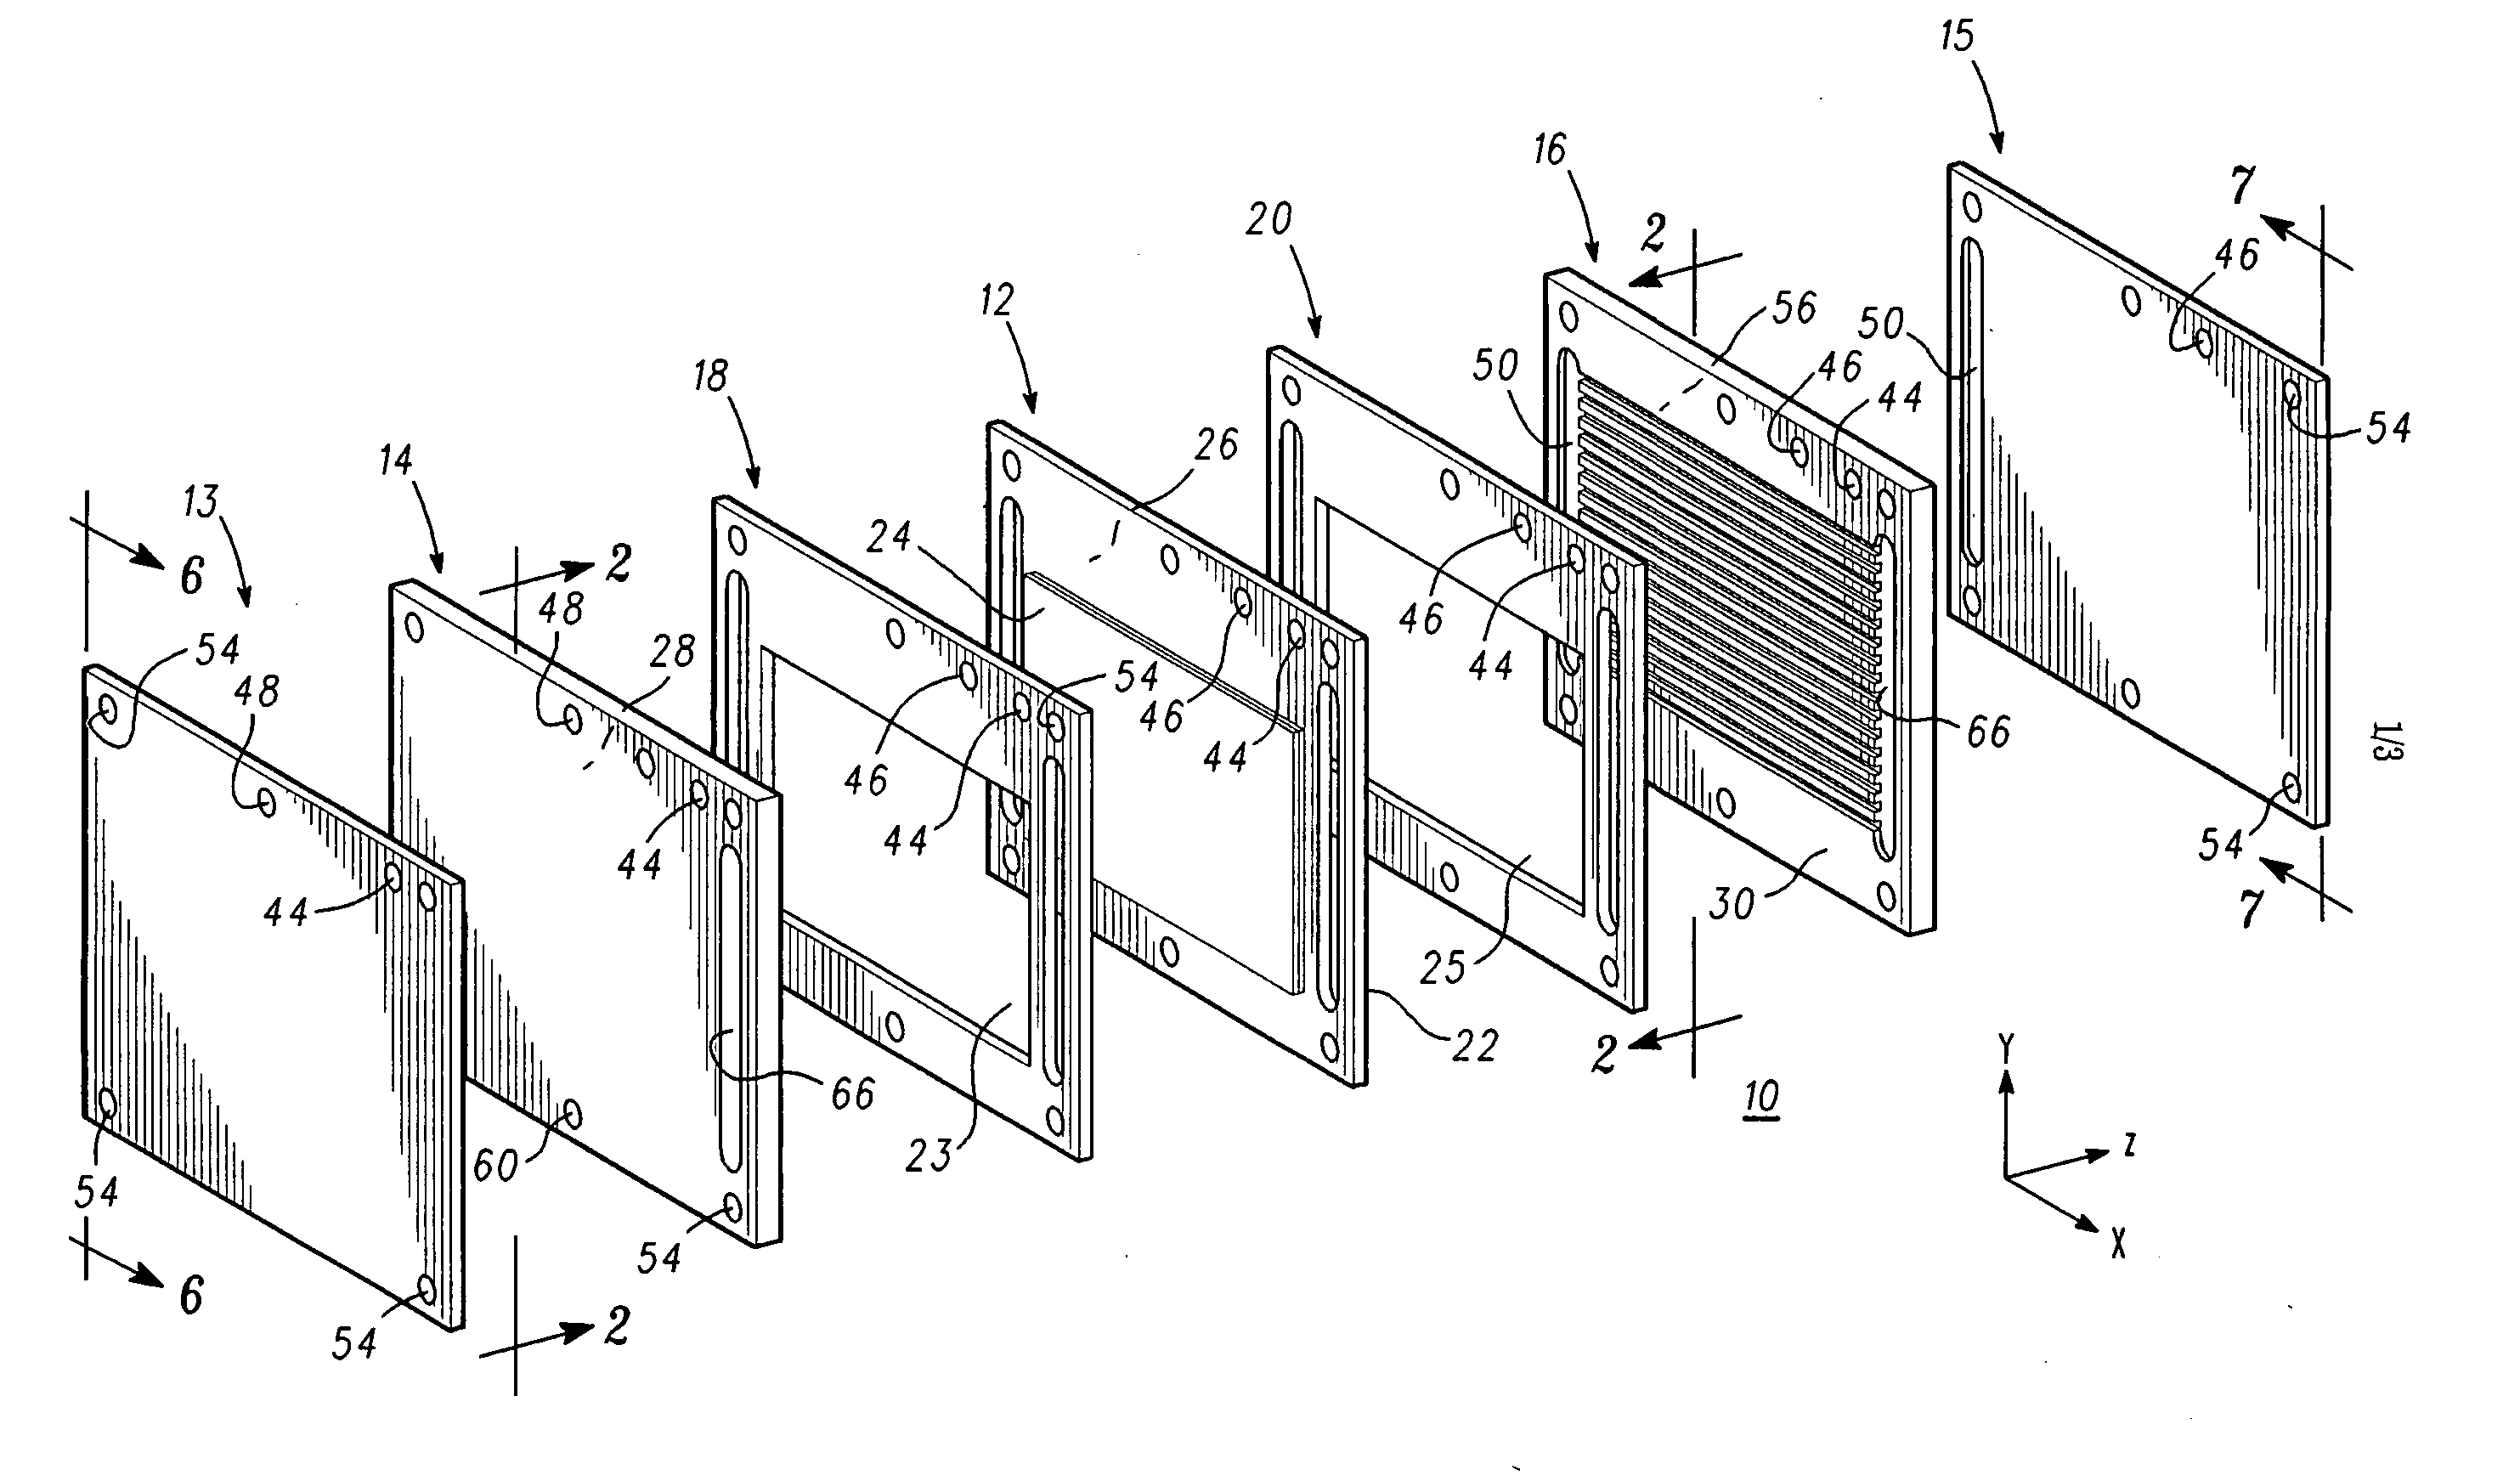 Polymer electrolyte membrane fuel cell stack